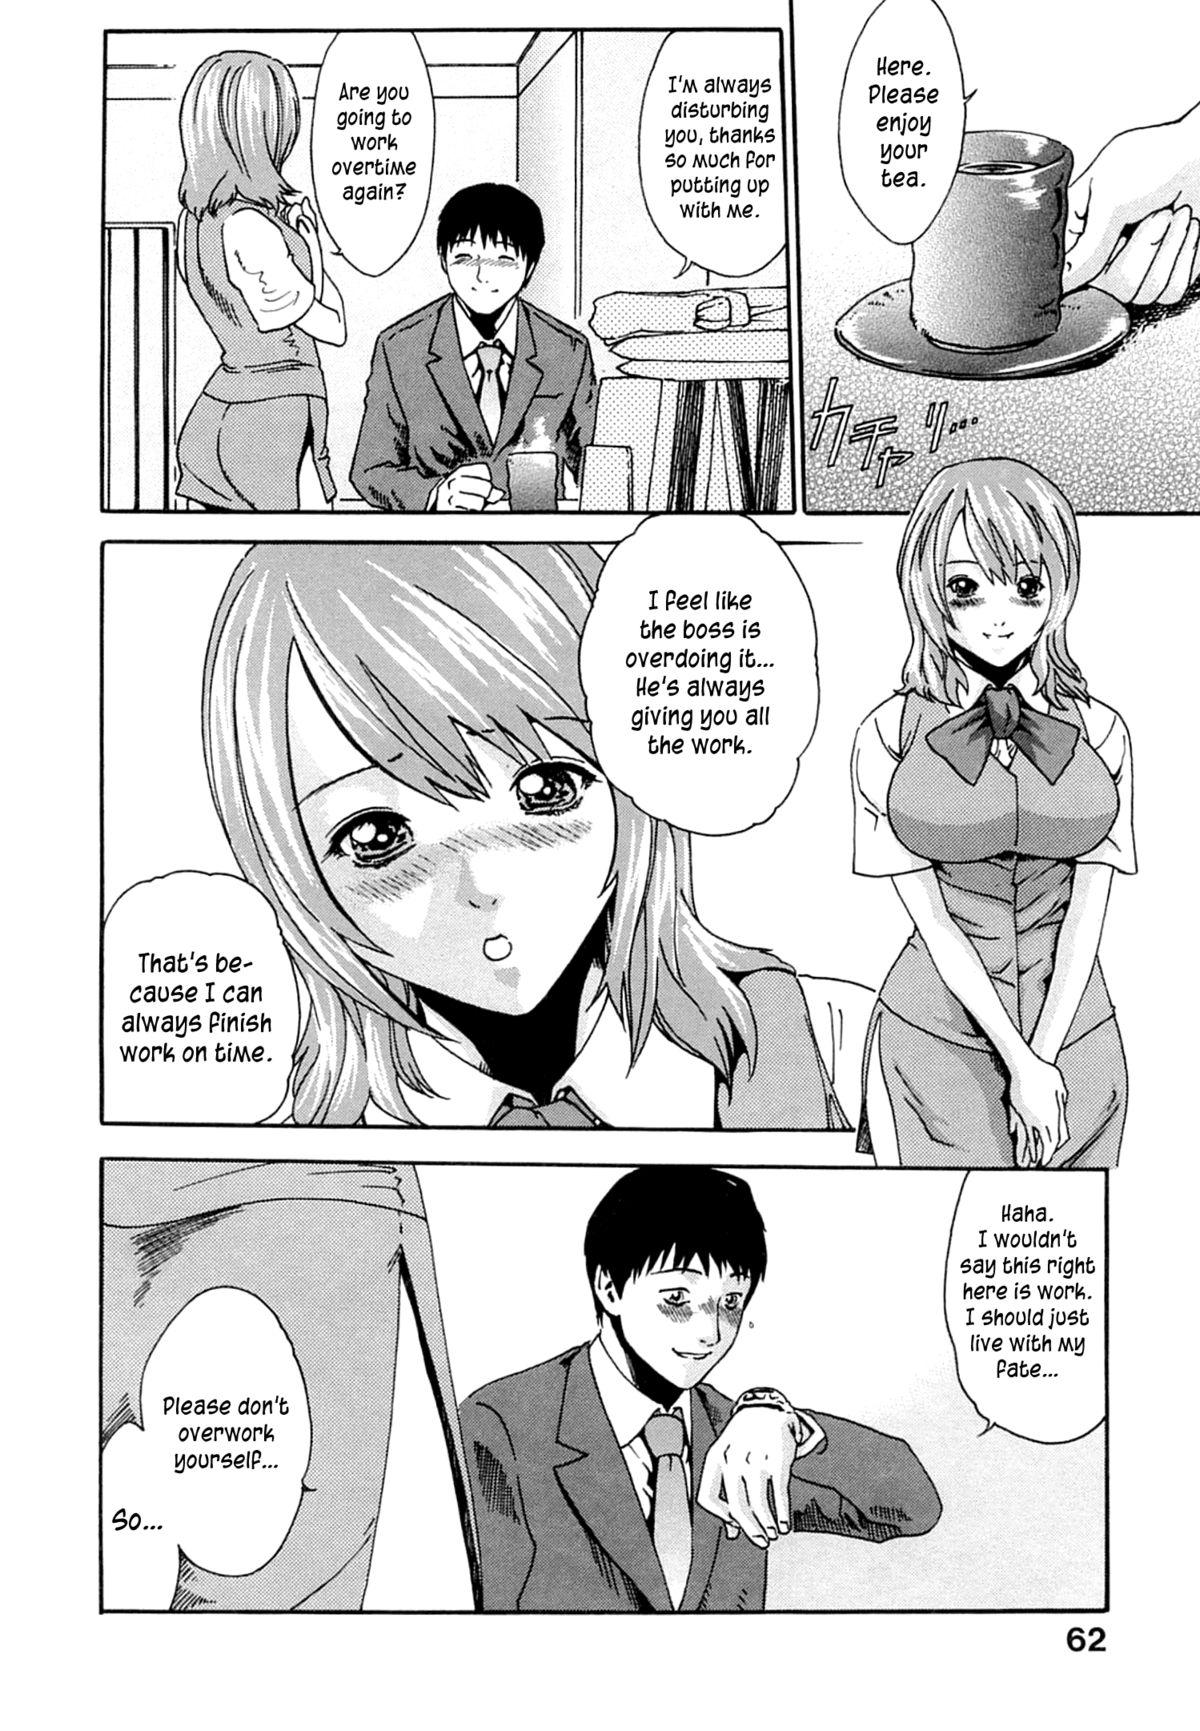 Japan The Pantry Woman Monster Cock - Page 4